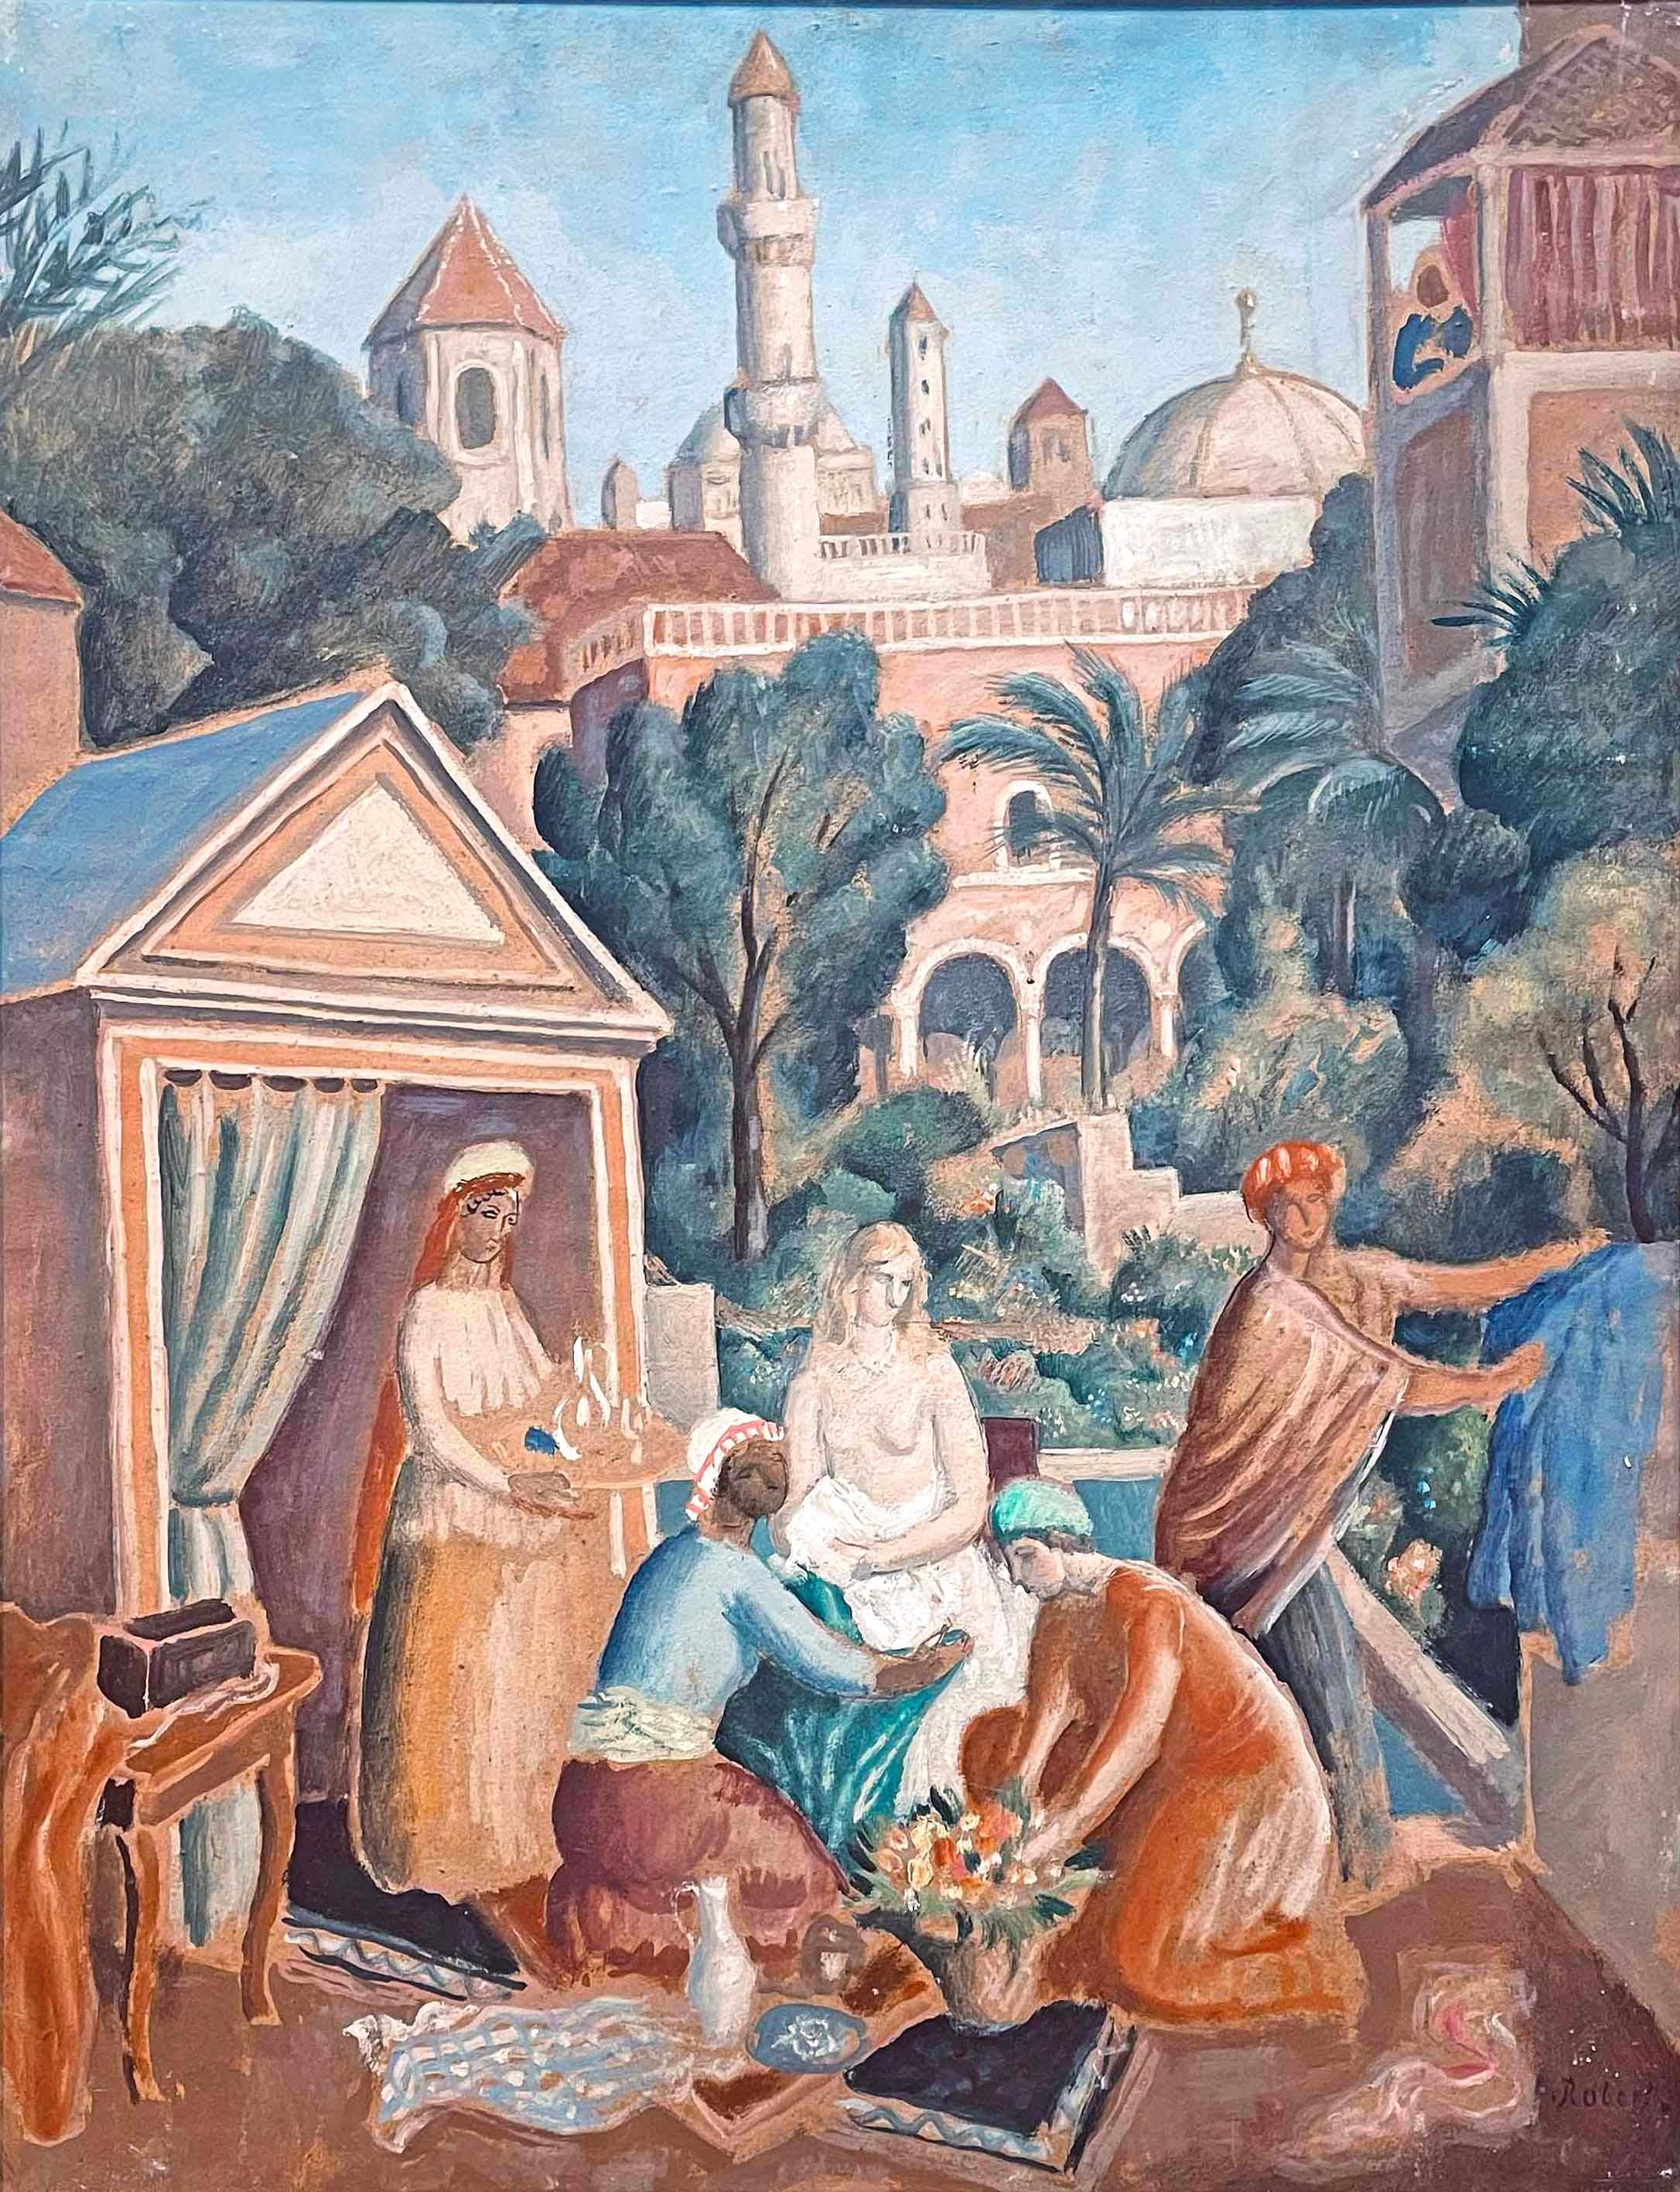 This rich tapestry of life in and around a quiet courtyard in North Africa -- with domes, towers and minarets in the distance, and a woman lingering on a balcony to one side -- was painted by Paul Théophile Robert, a Swiss artist.  The scene seems